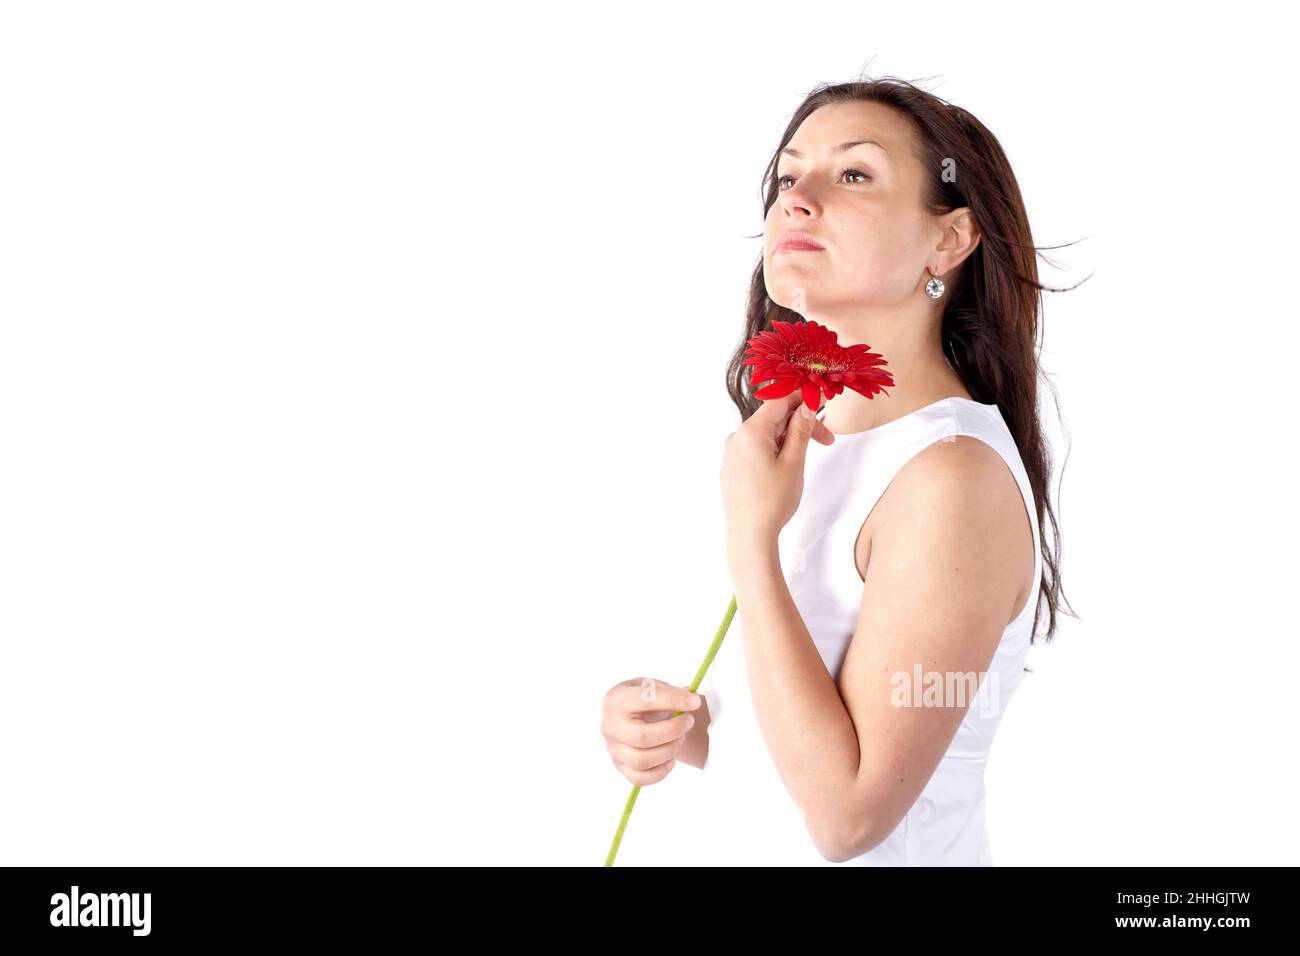 Spring portrait of young woman with healthy long hair holding red gerbera flower. Beautiful female model face. Isolated on white background. Stock Photo